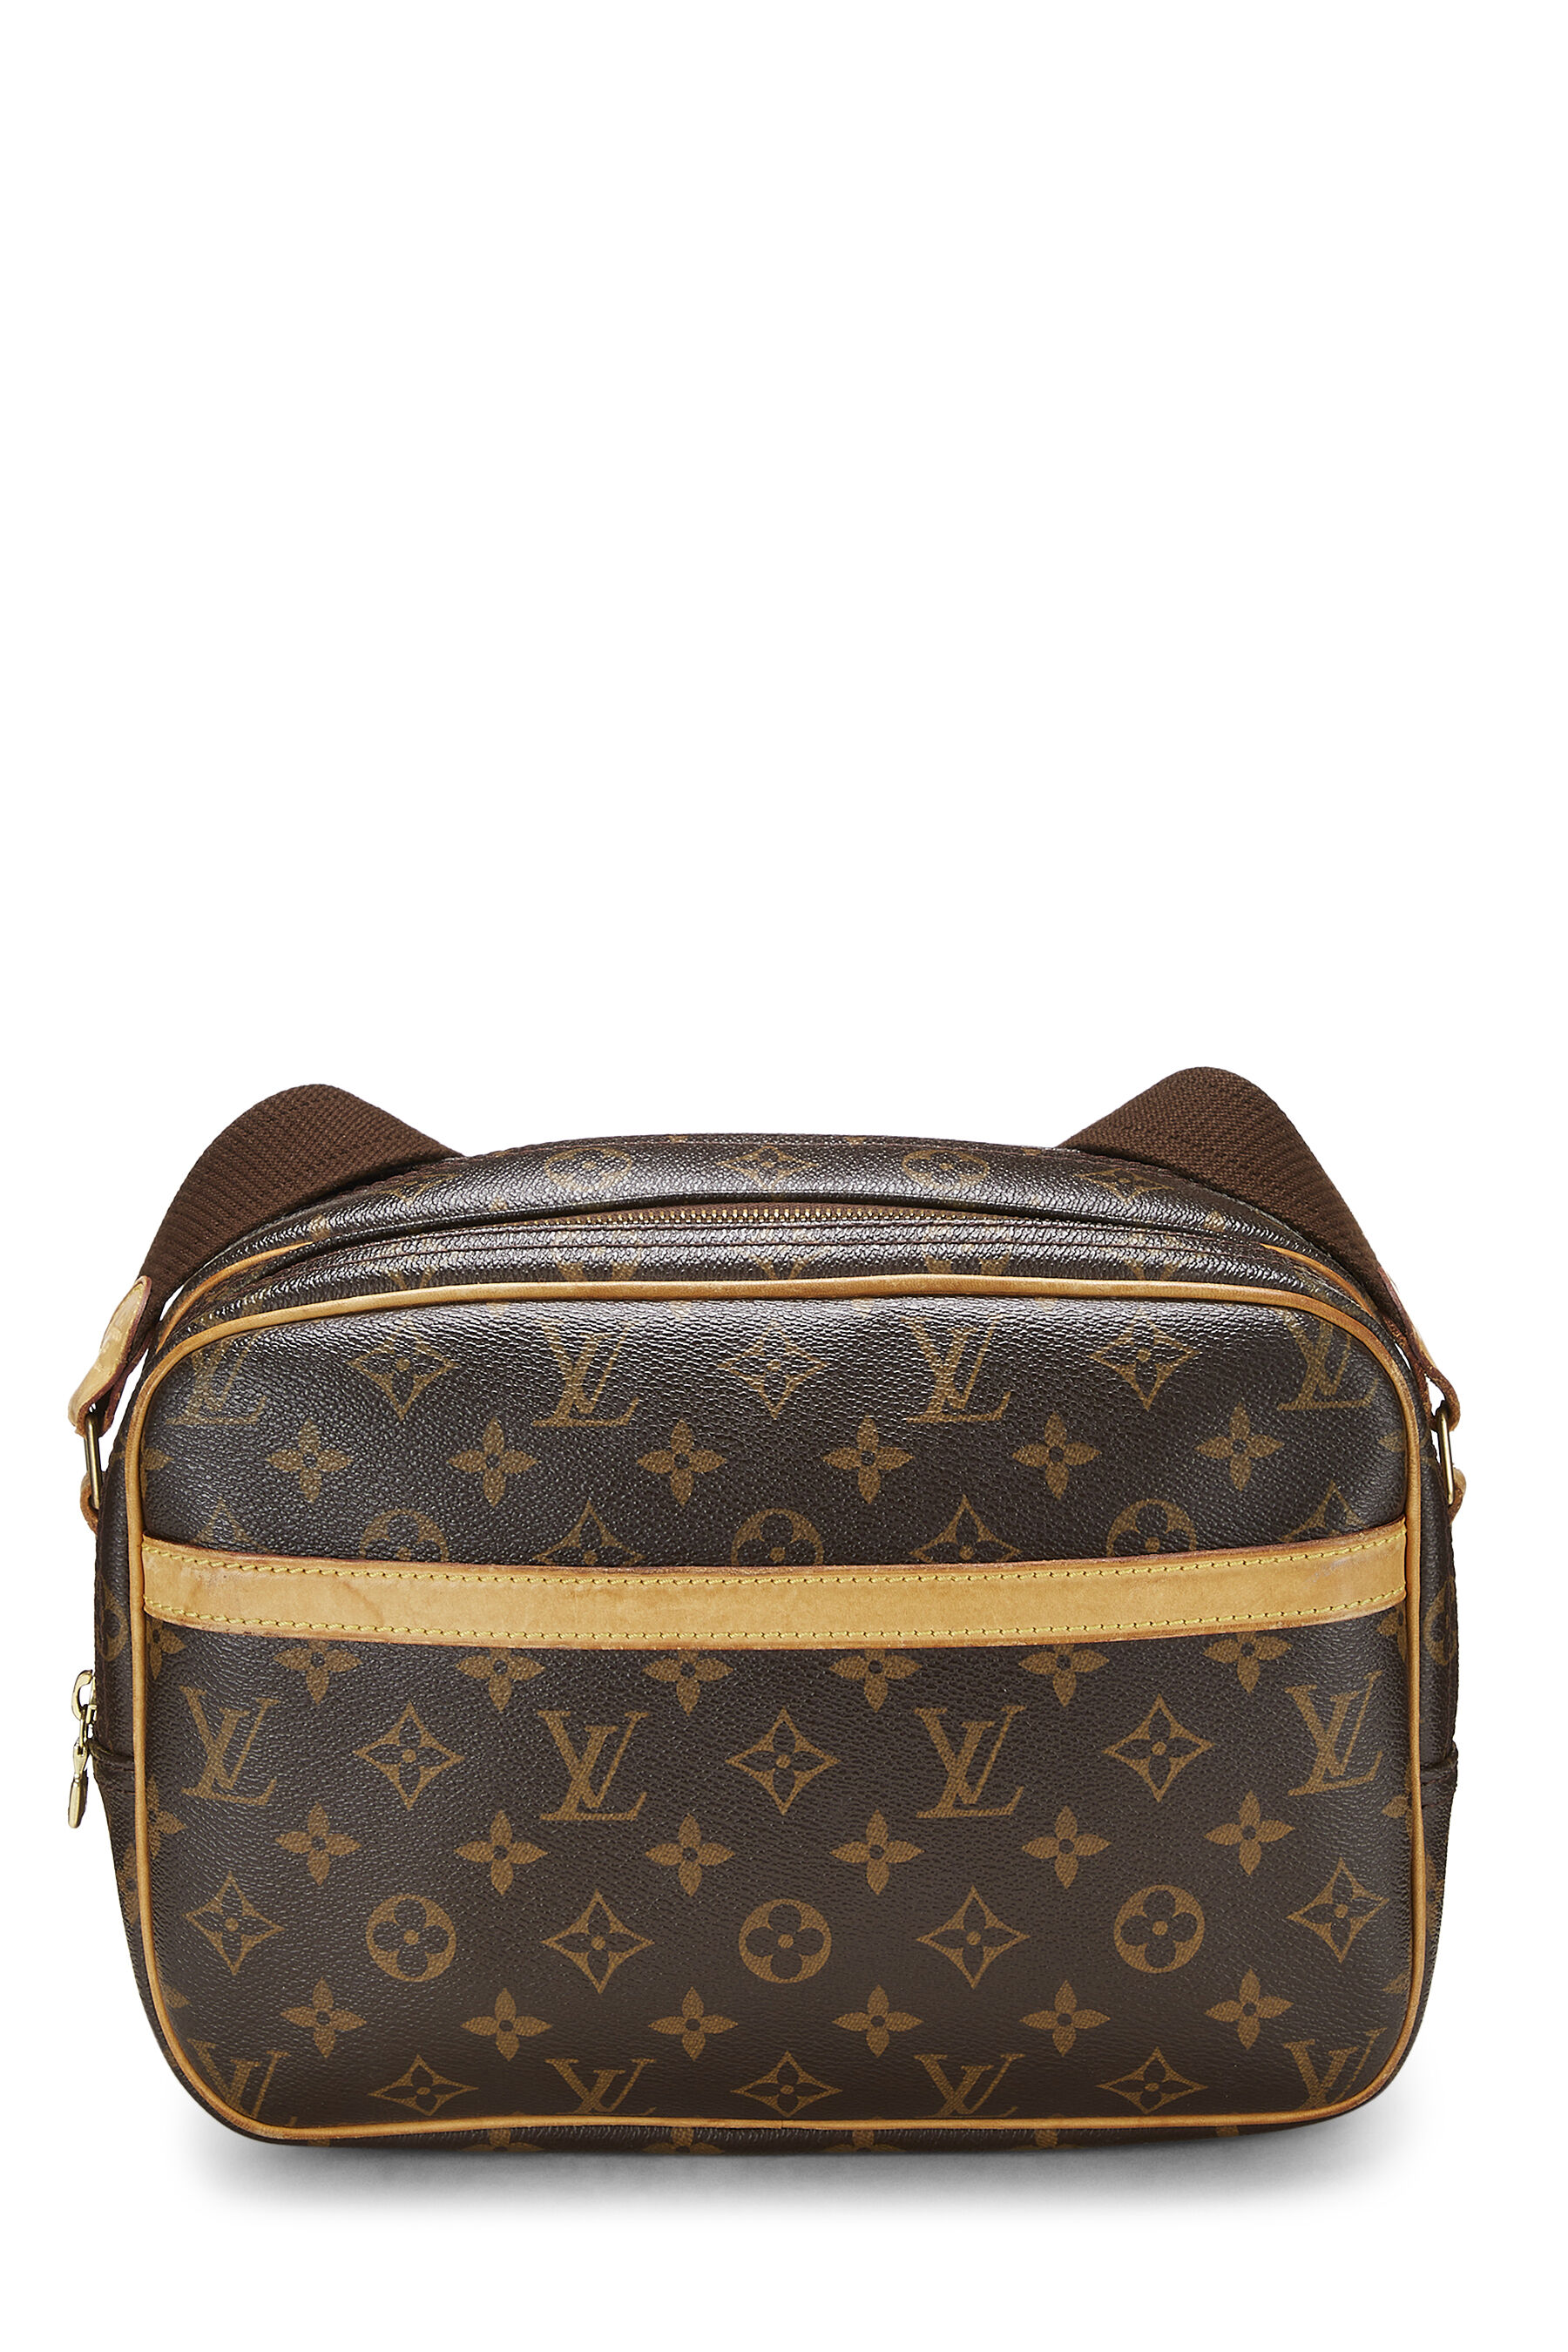 Queens of Couture - Louis Vuitton Reporter PM Monogram Canvas available now  just $640 LAYAWAY AVAILABLE! #GuaranteedAuthentic